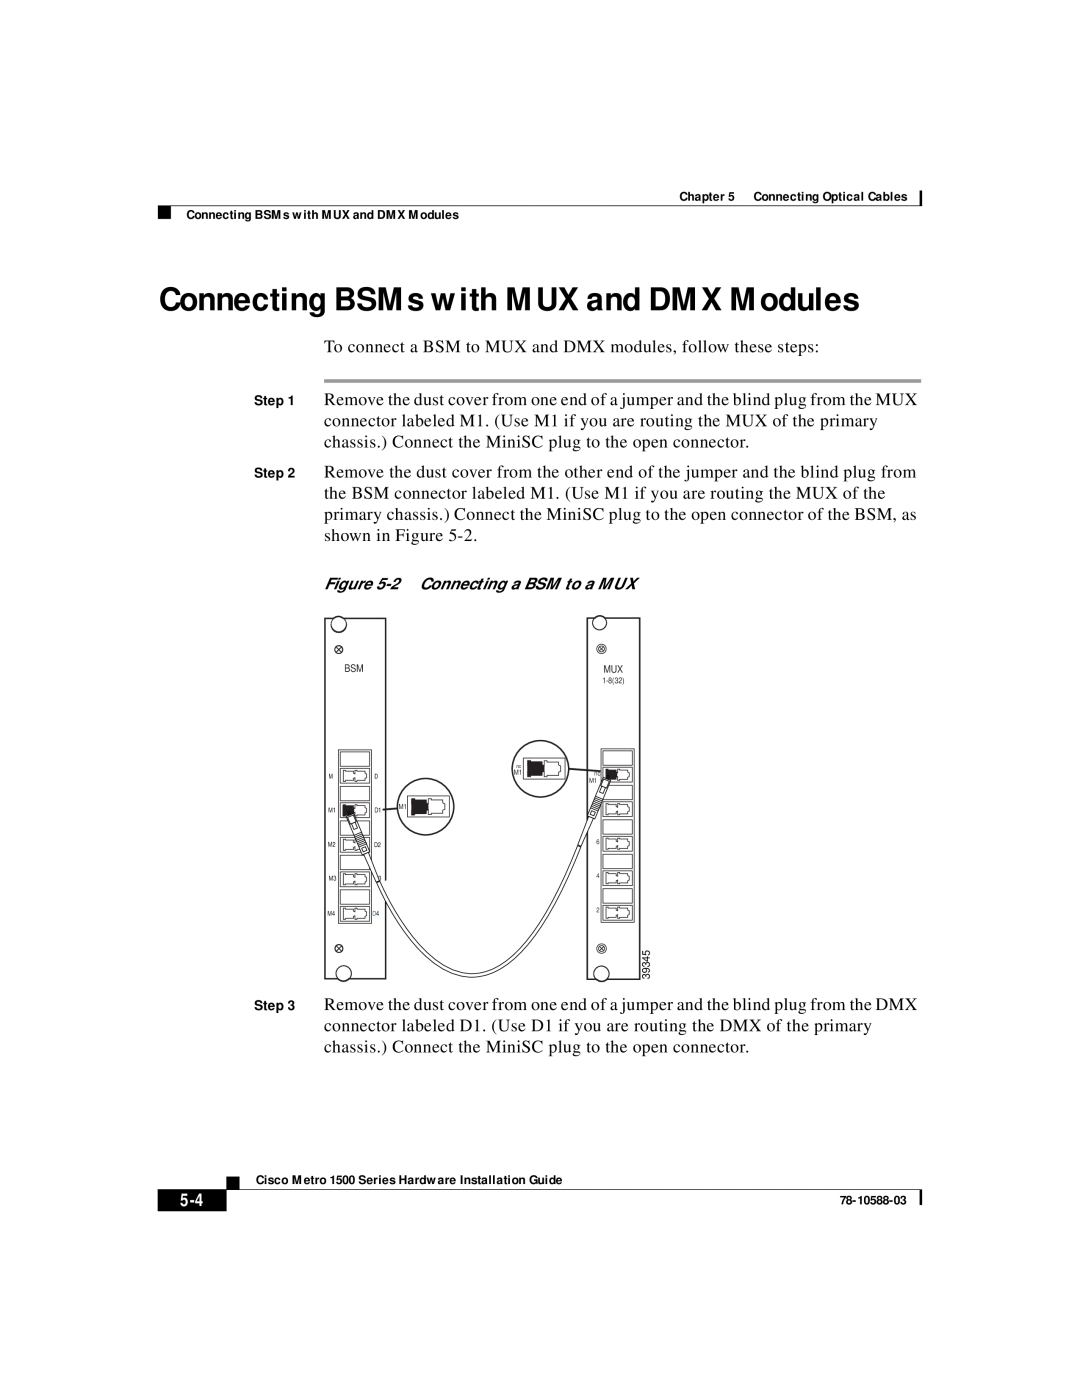 Cisco Systems 1500 manual Connecting BSMs with MUX and DMX Modules 